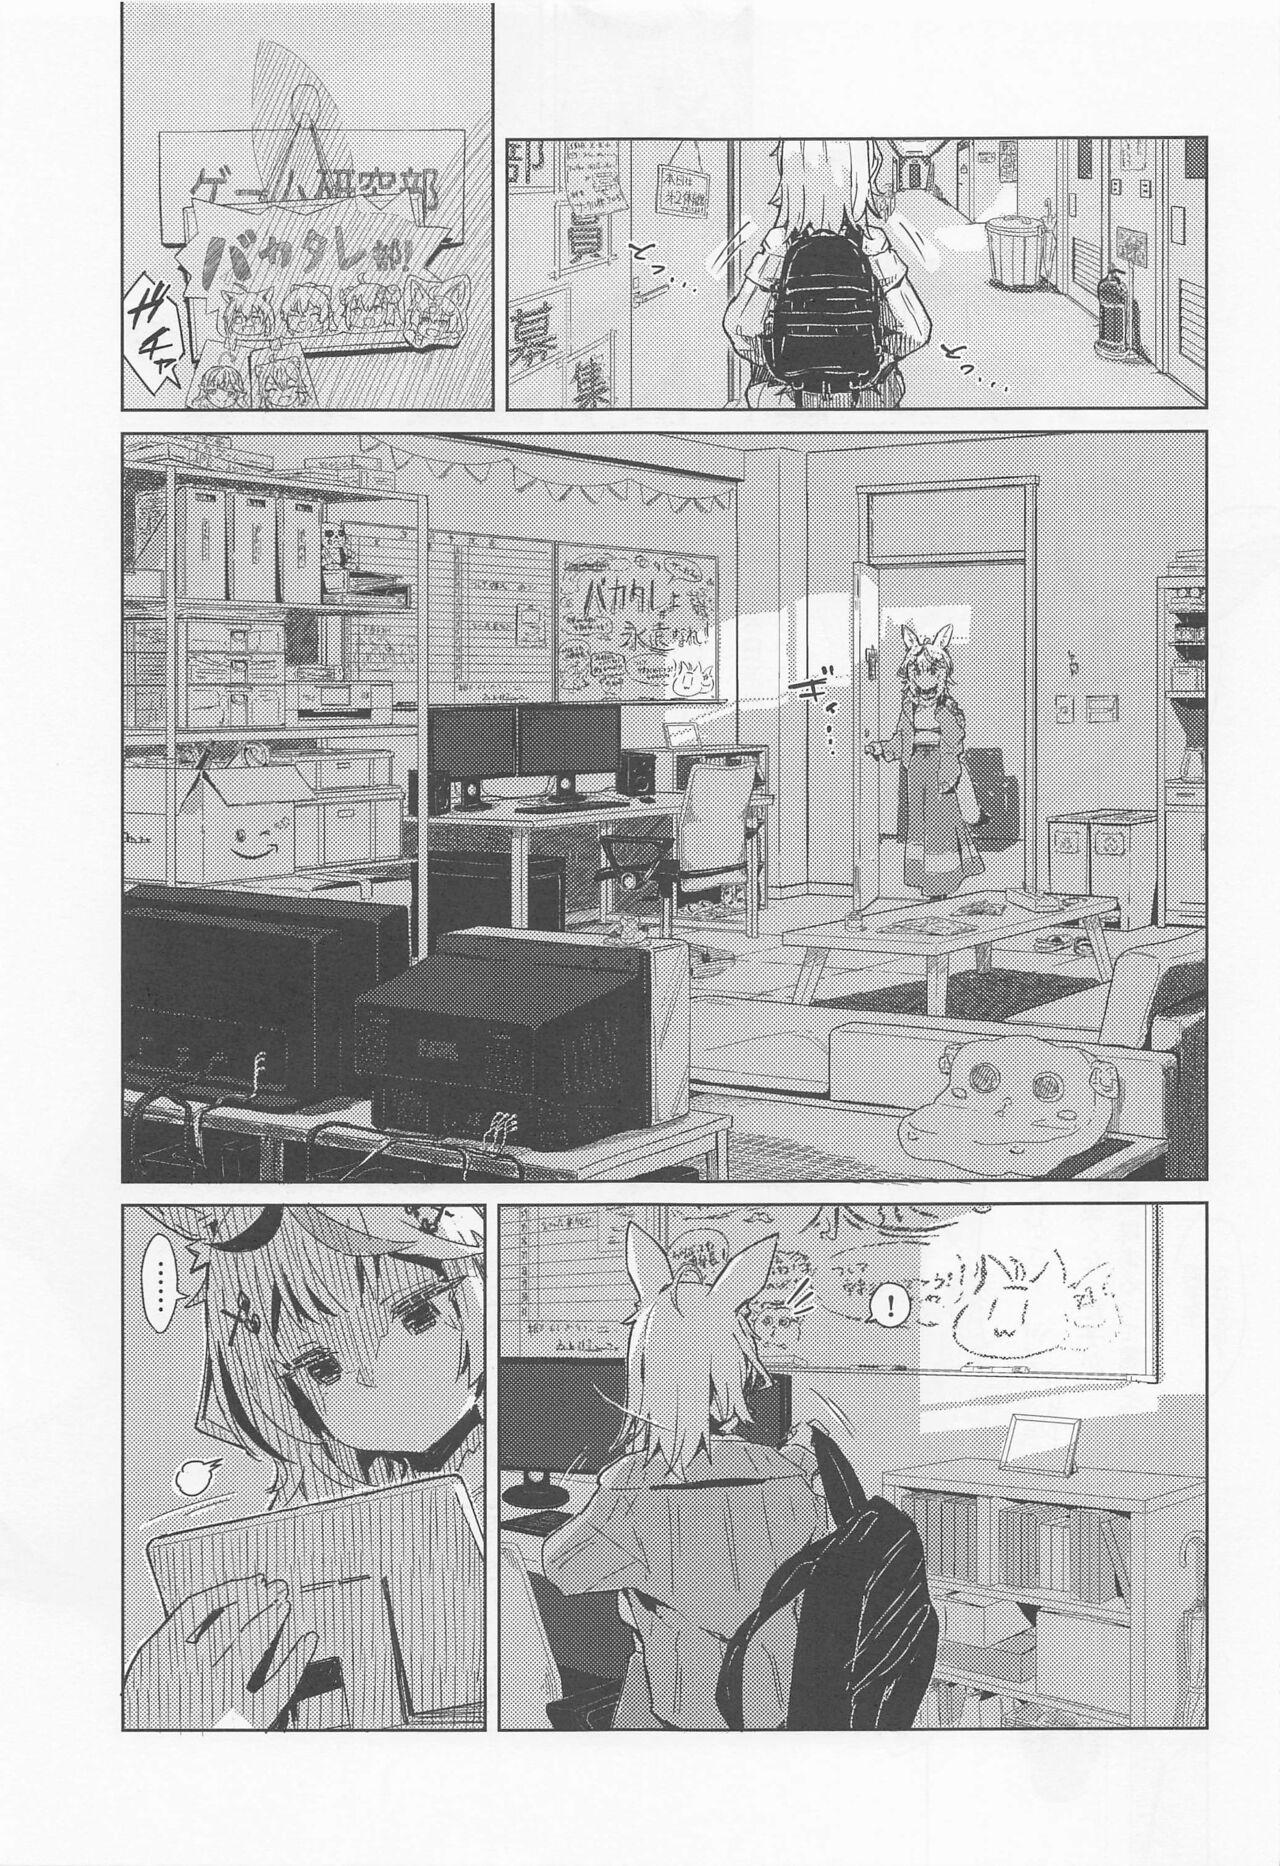 Hardcore Porno Fennec wa Iseijin no Yume o Miru ka - Does The Fennec Dream of The Lovely Visitor? - Hololive Cruising - Page 2